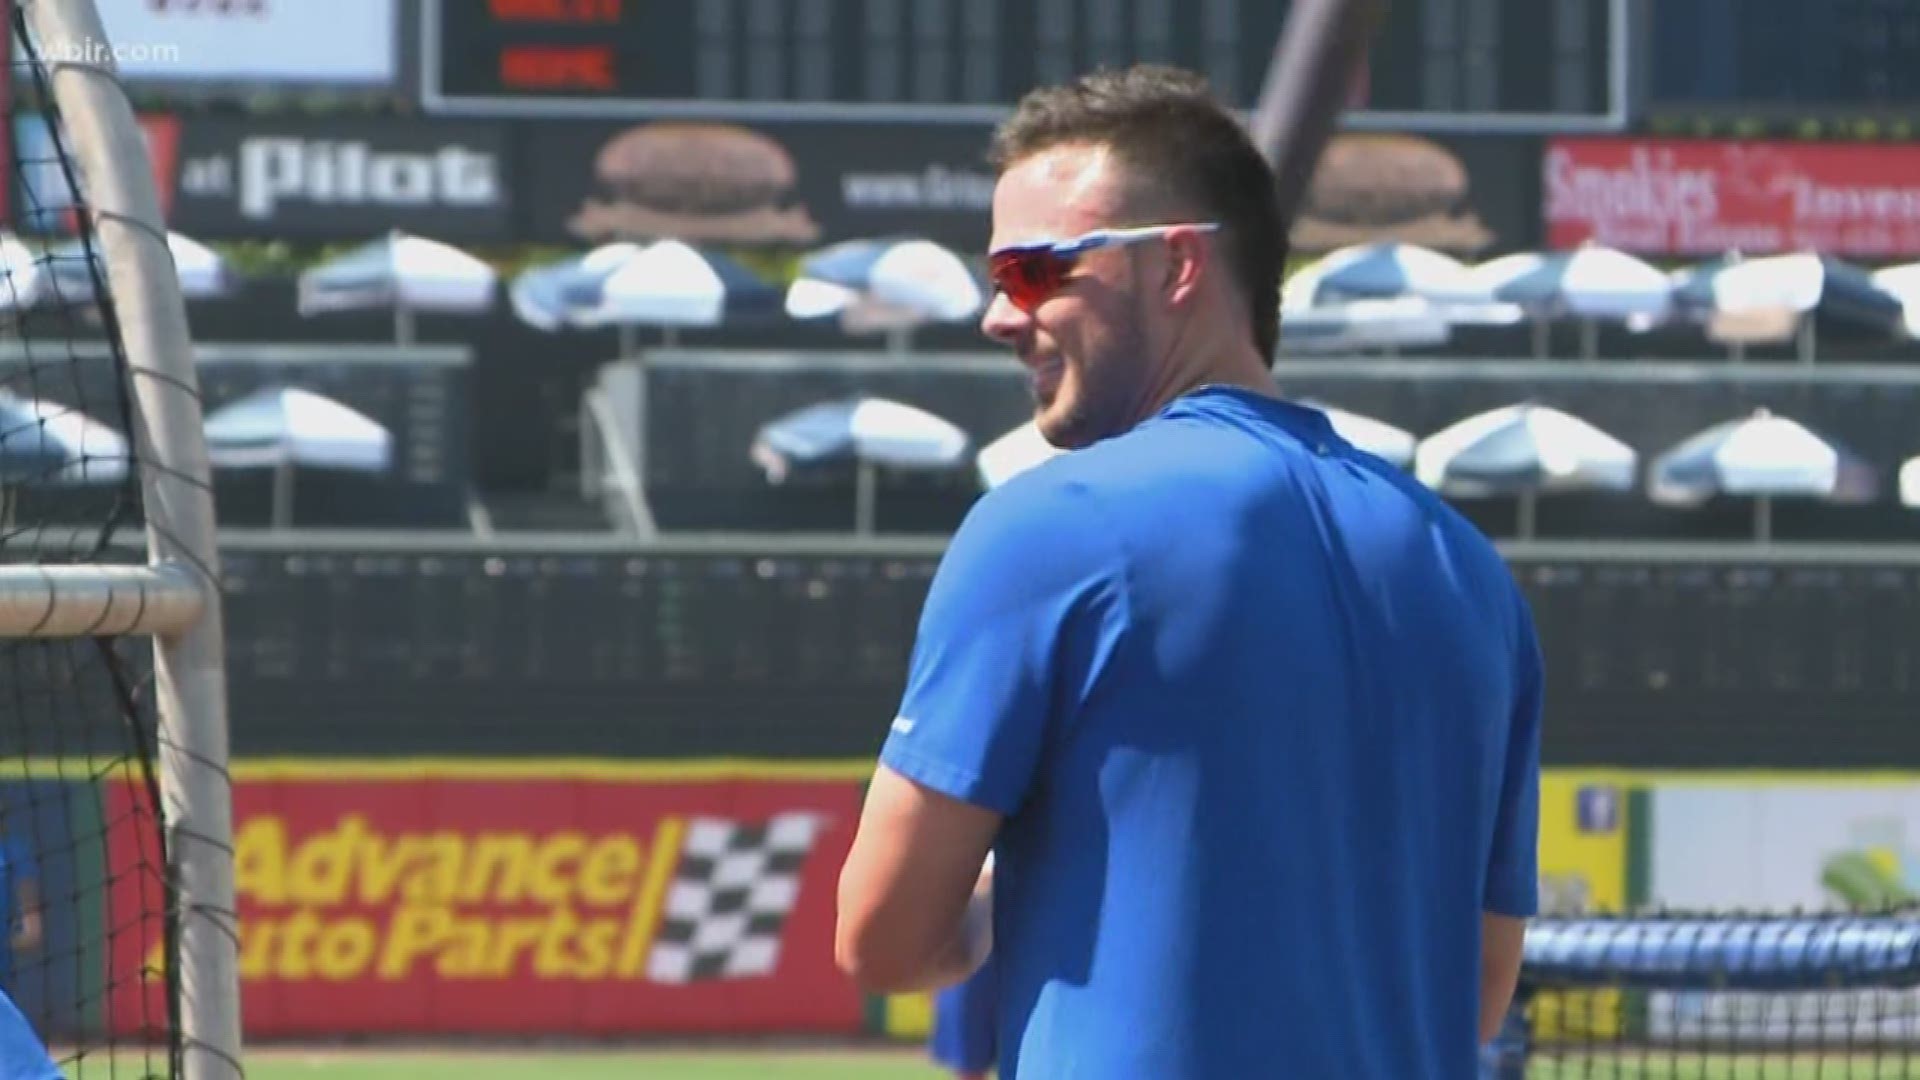 Chicago Cubs third baseman and superstar Kris Bryant was back in town on a rehab assignment.